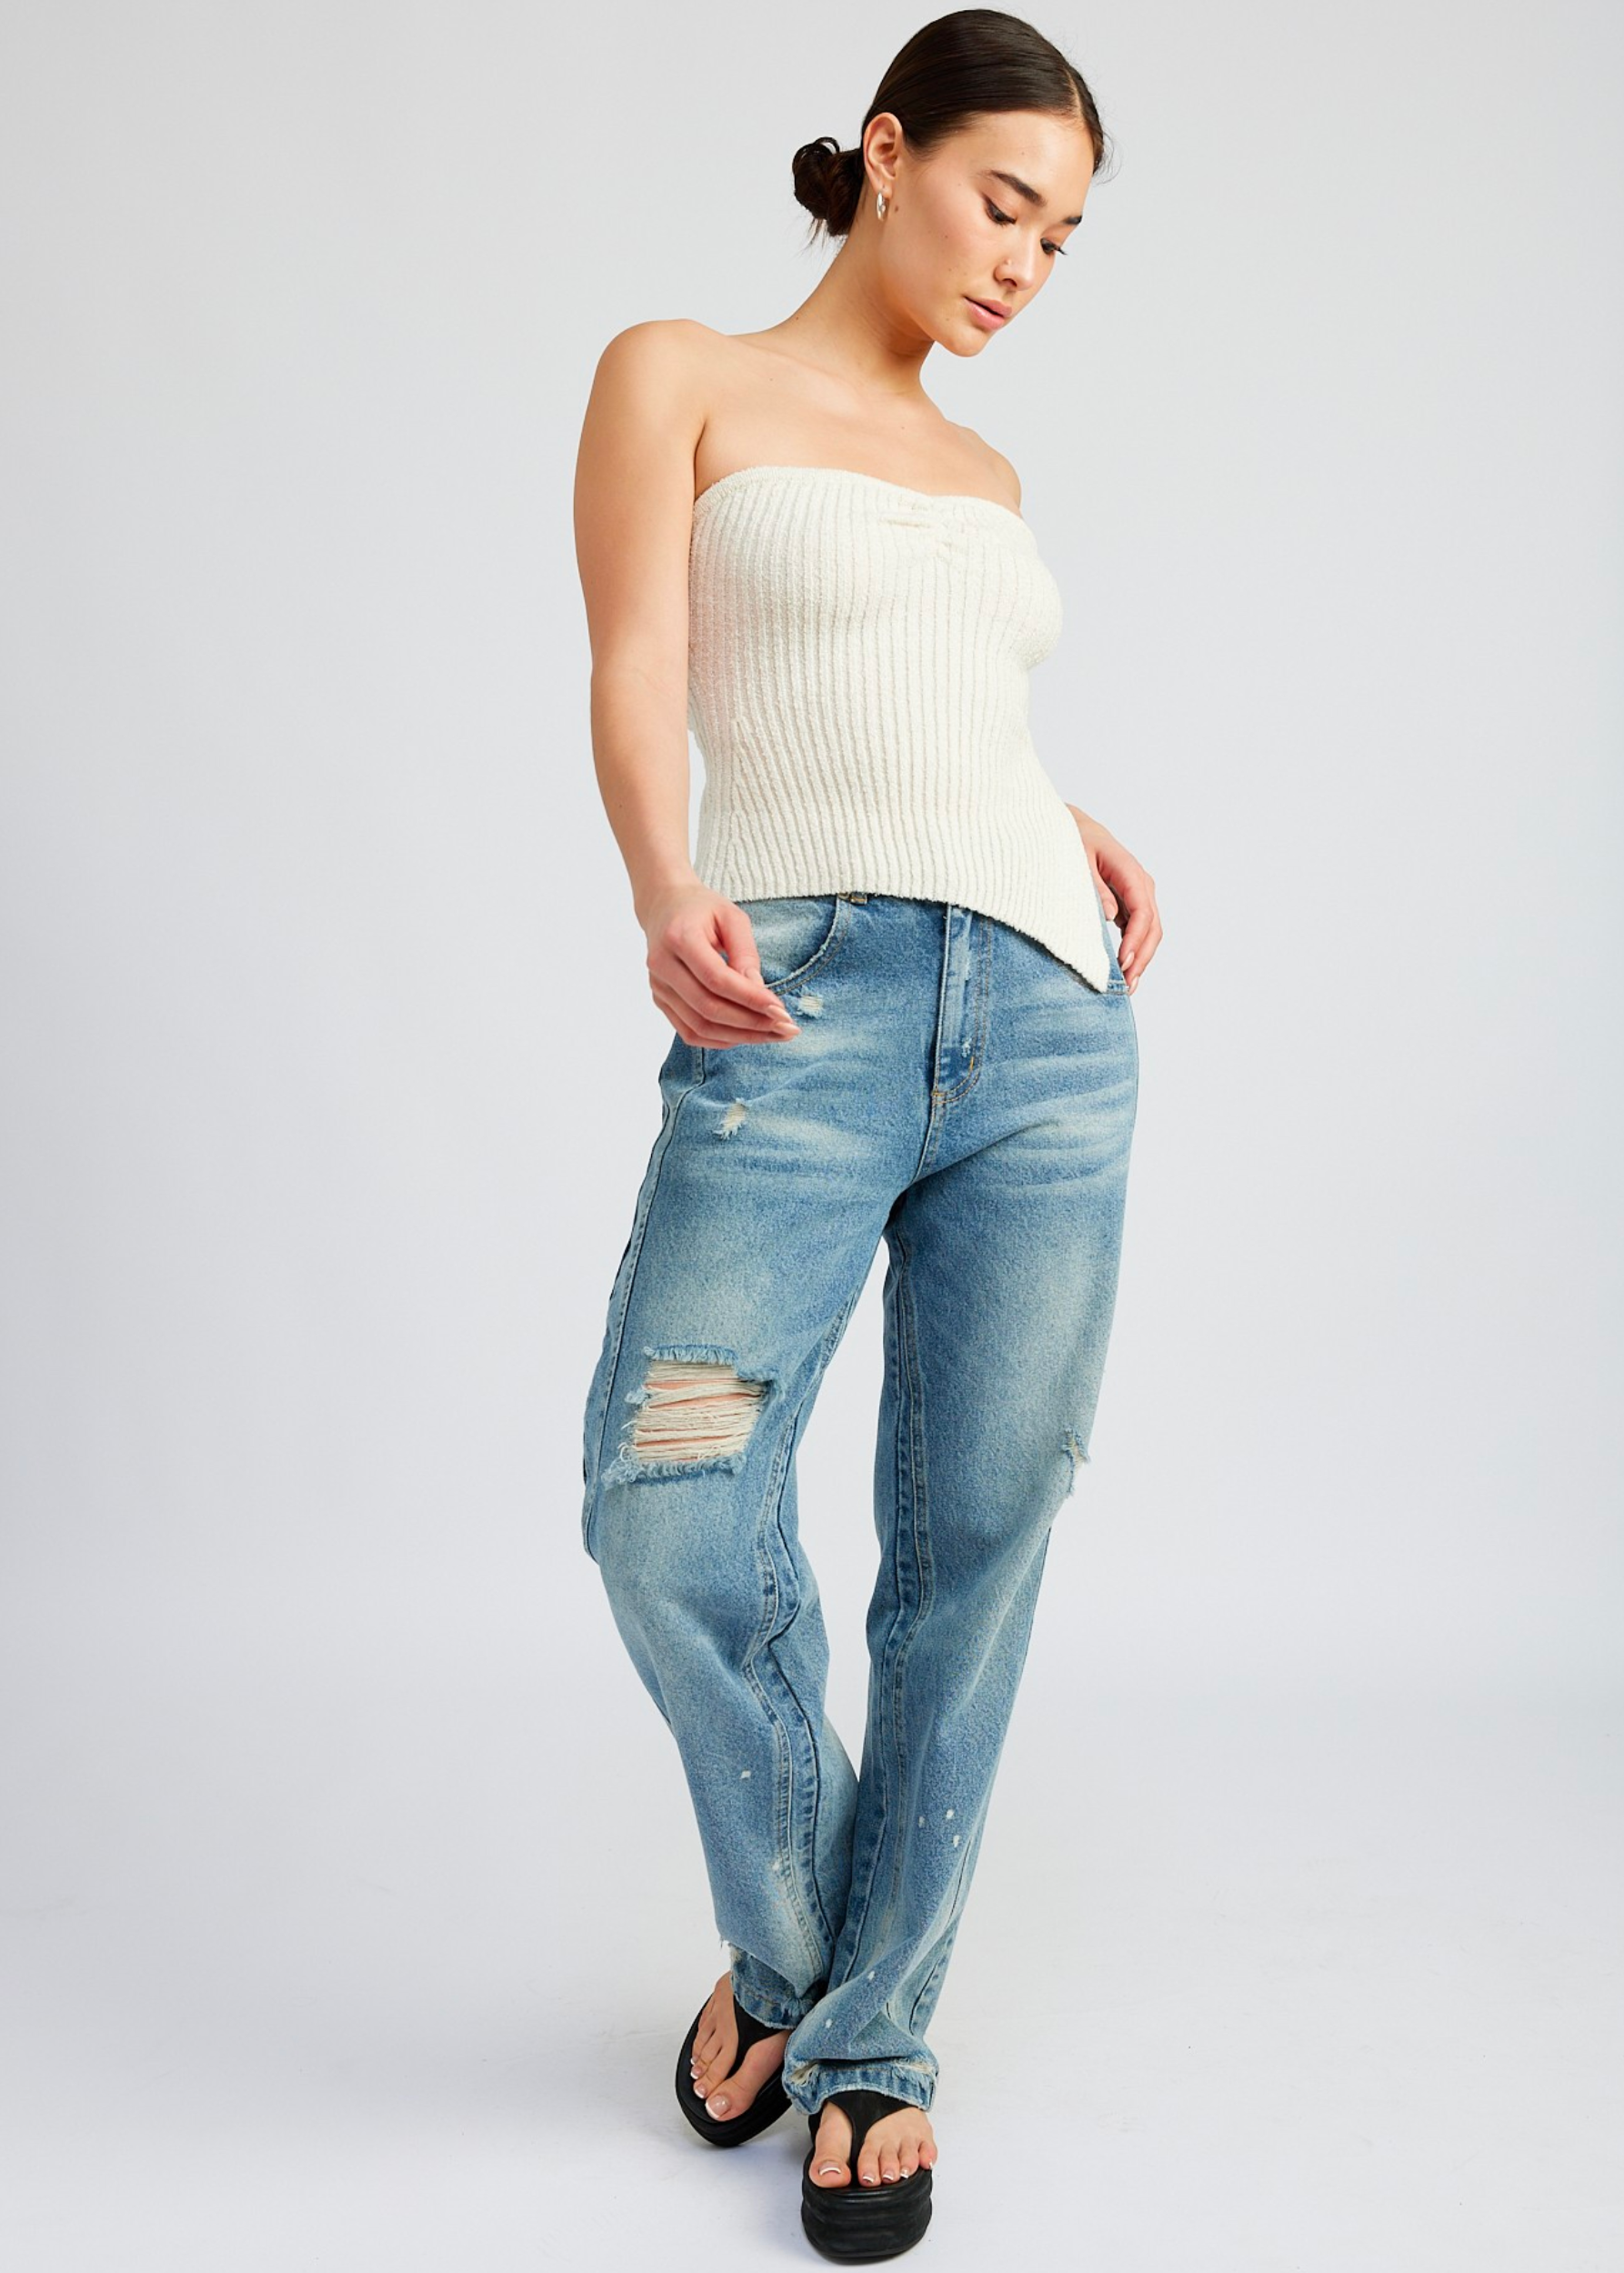 ASYMMETRICAL RUCHED TUBE TOP